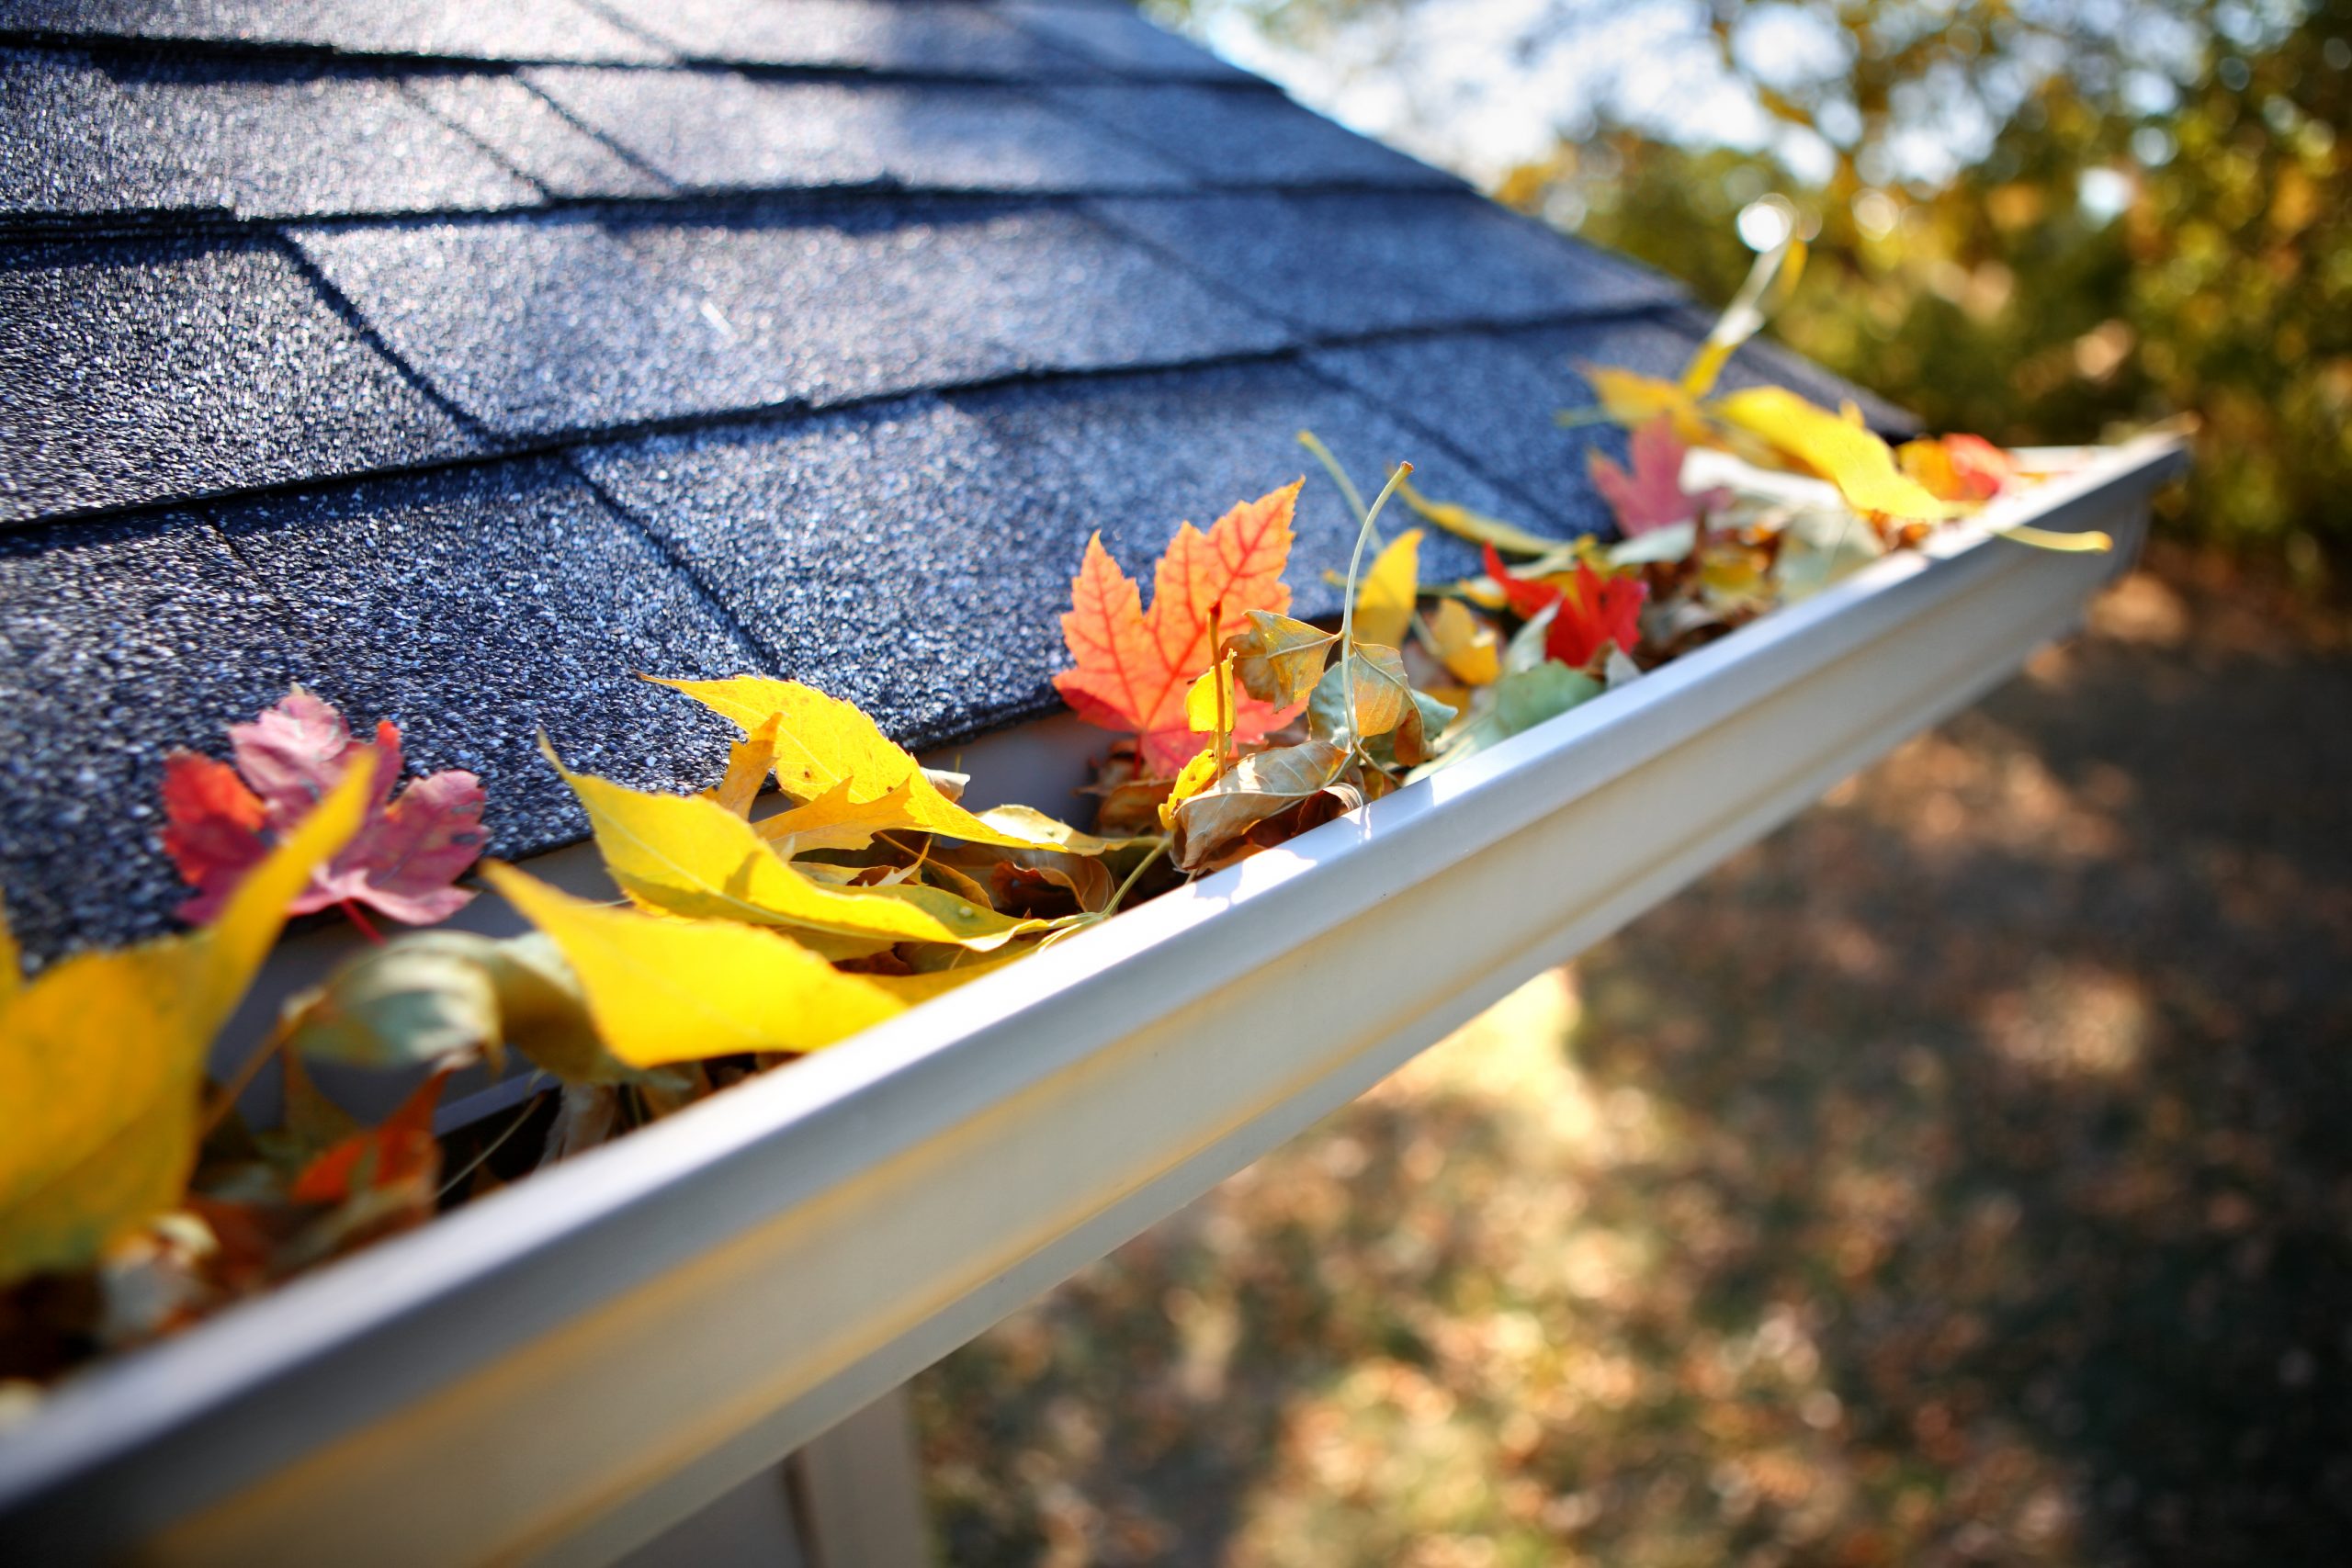 Gutter Cleaning Company in Media, PA